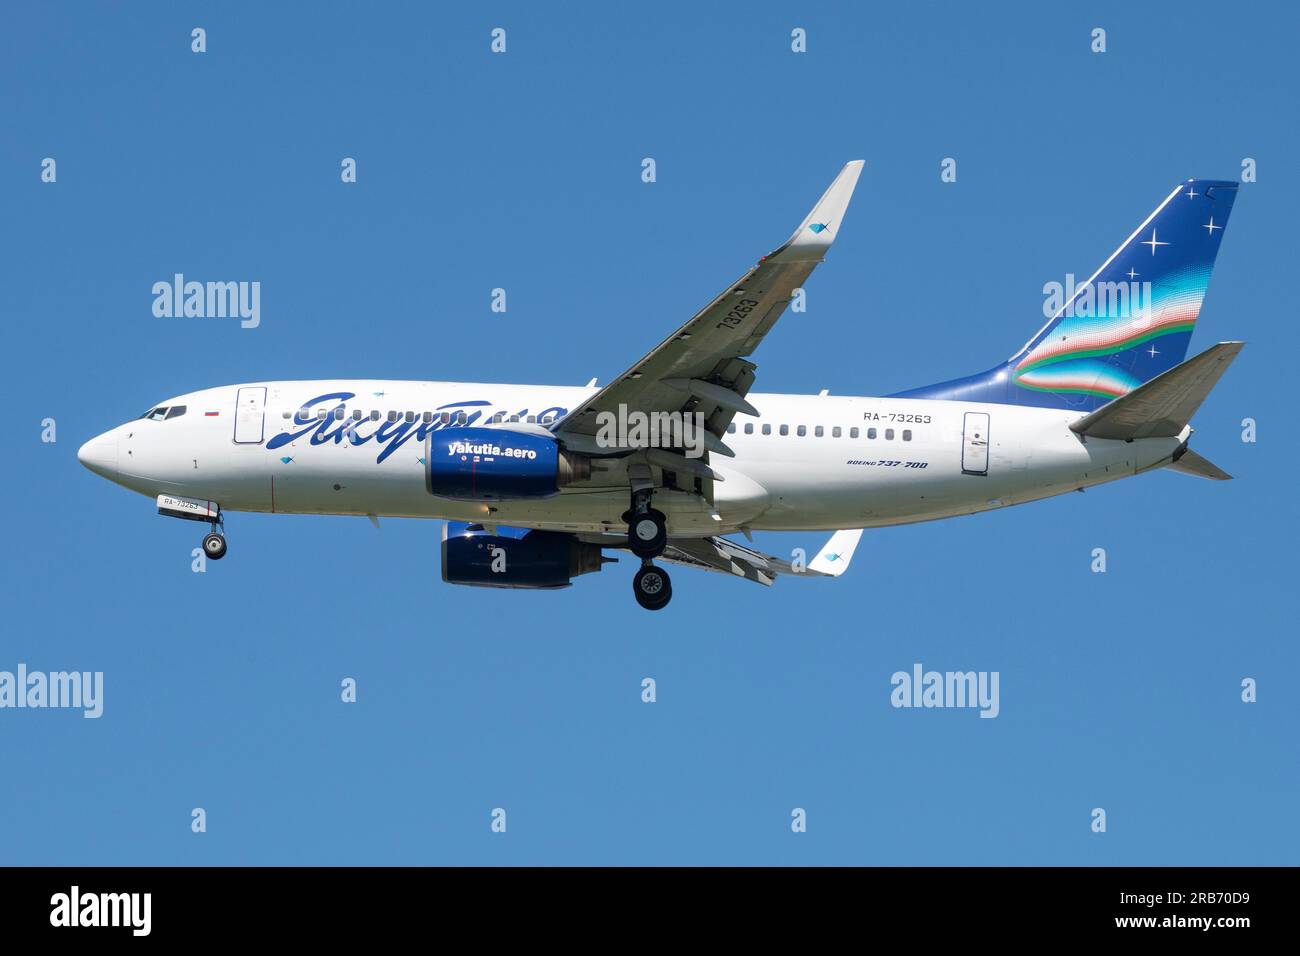 SAINT PETERSBURG, RUSSIA - MAY 30, 2023: Airplane Boeing 737-700 (RA-73263) of Yakutia Airlines on the glide path in the blue cloudless sky. Side view Stock Photo